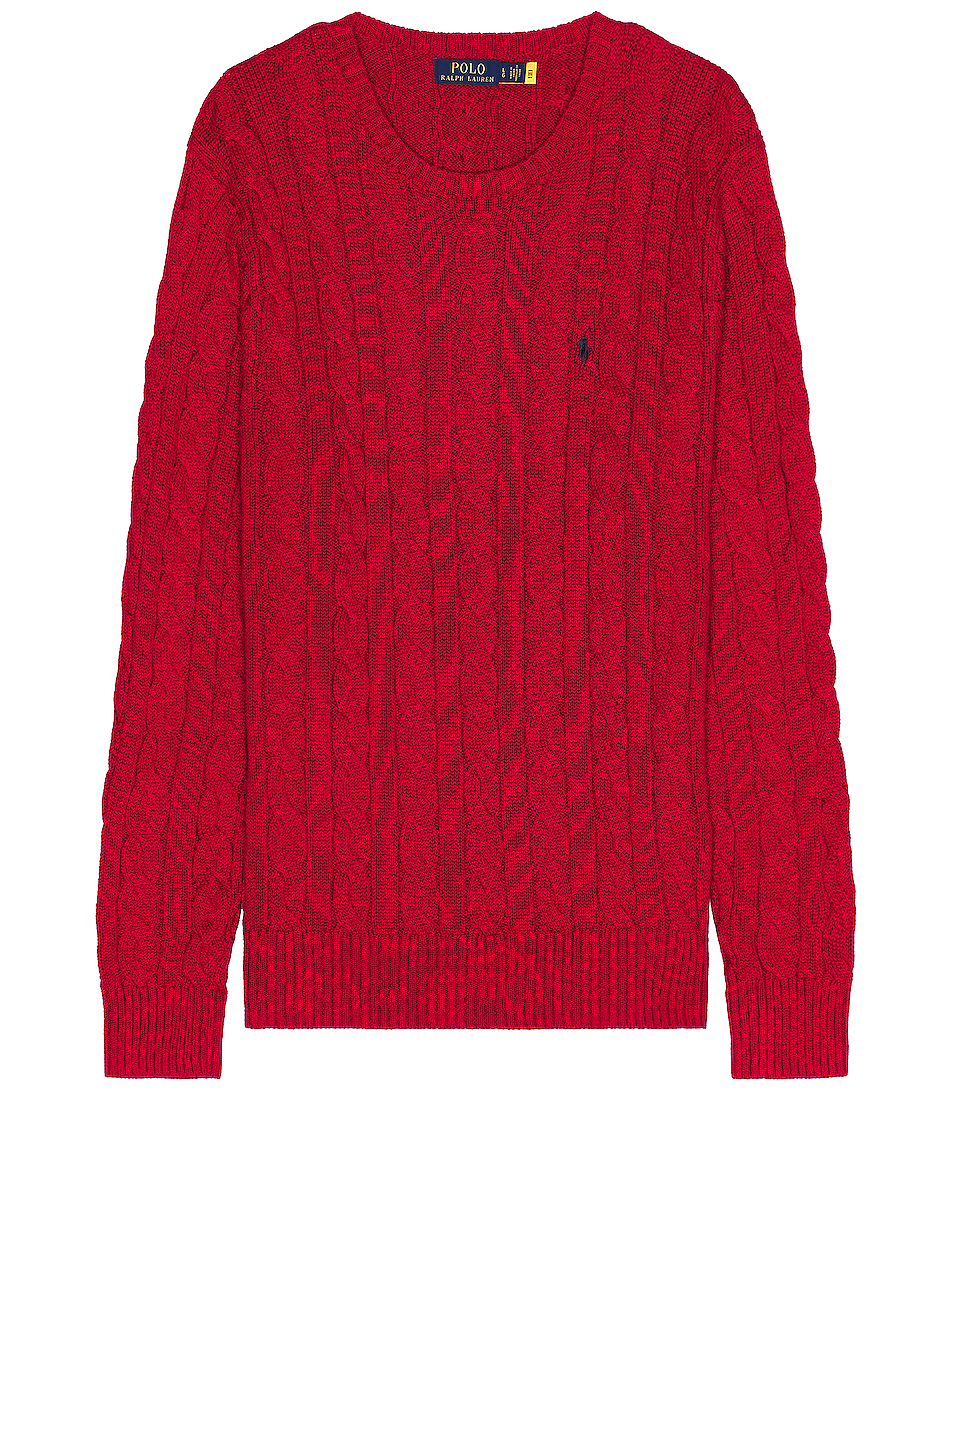 Image 1 of Polo Ralph Lauren Long Sleeve Sweater in Park Avenue Red